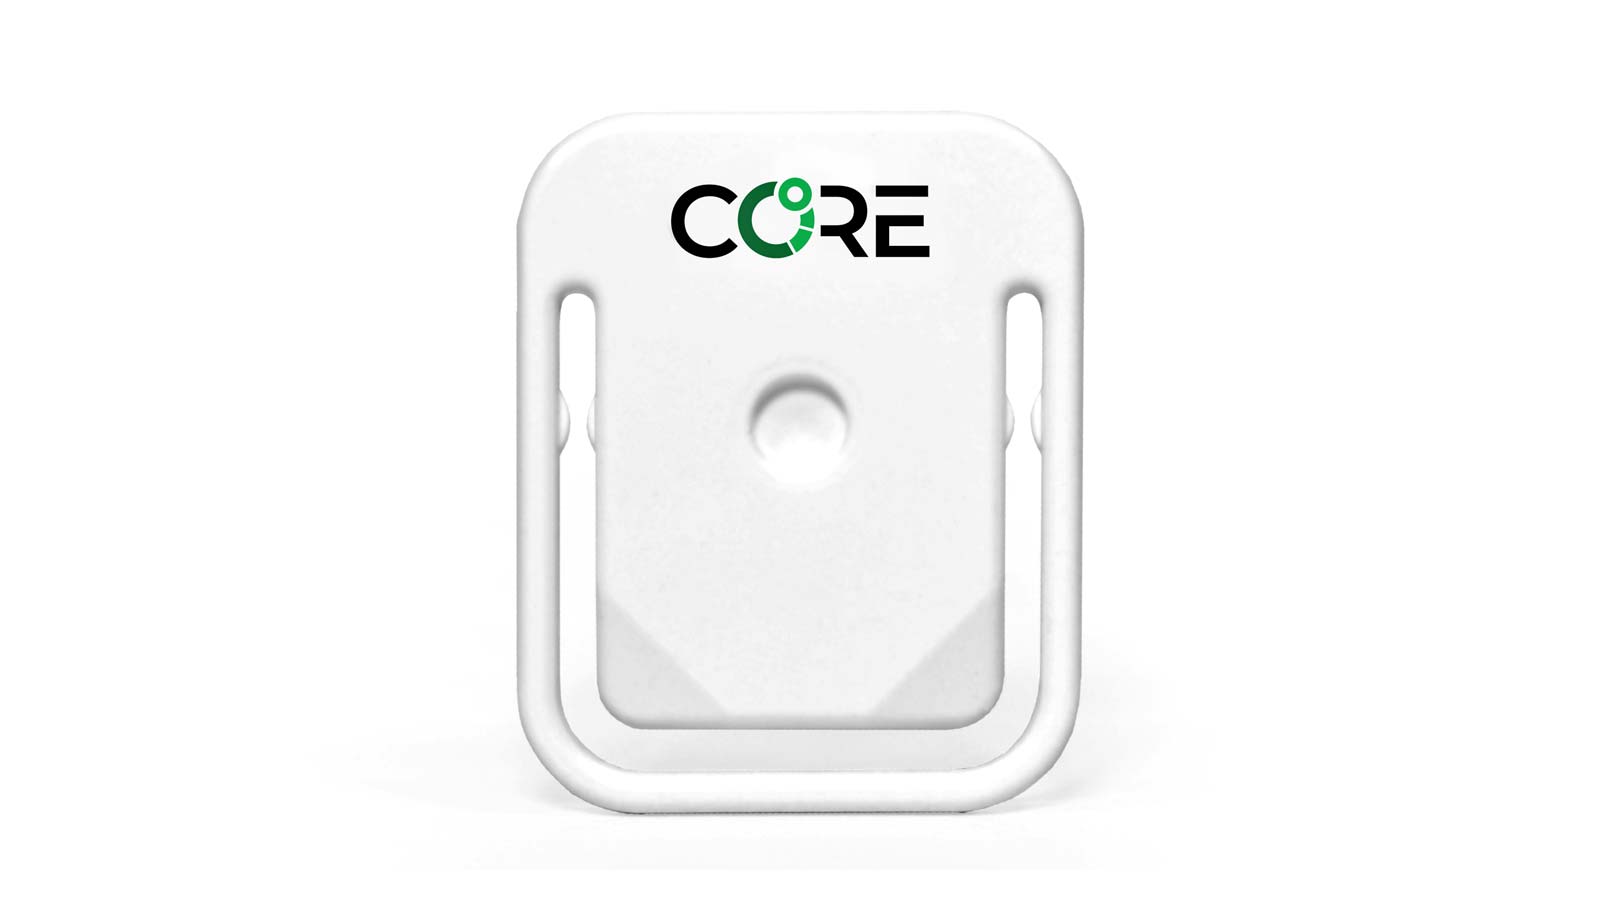 CORE Body Temperature Monitor, non-invasive internal body temp tracking to improve cycling performance, gadget